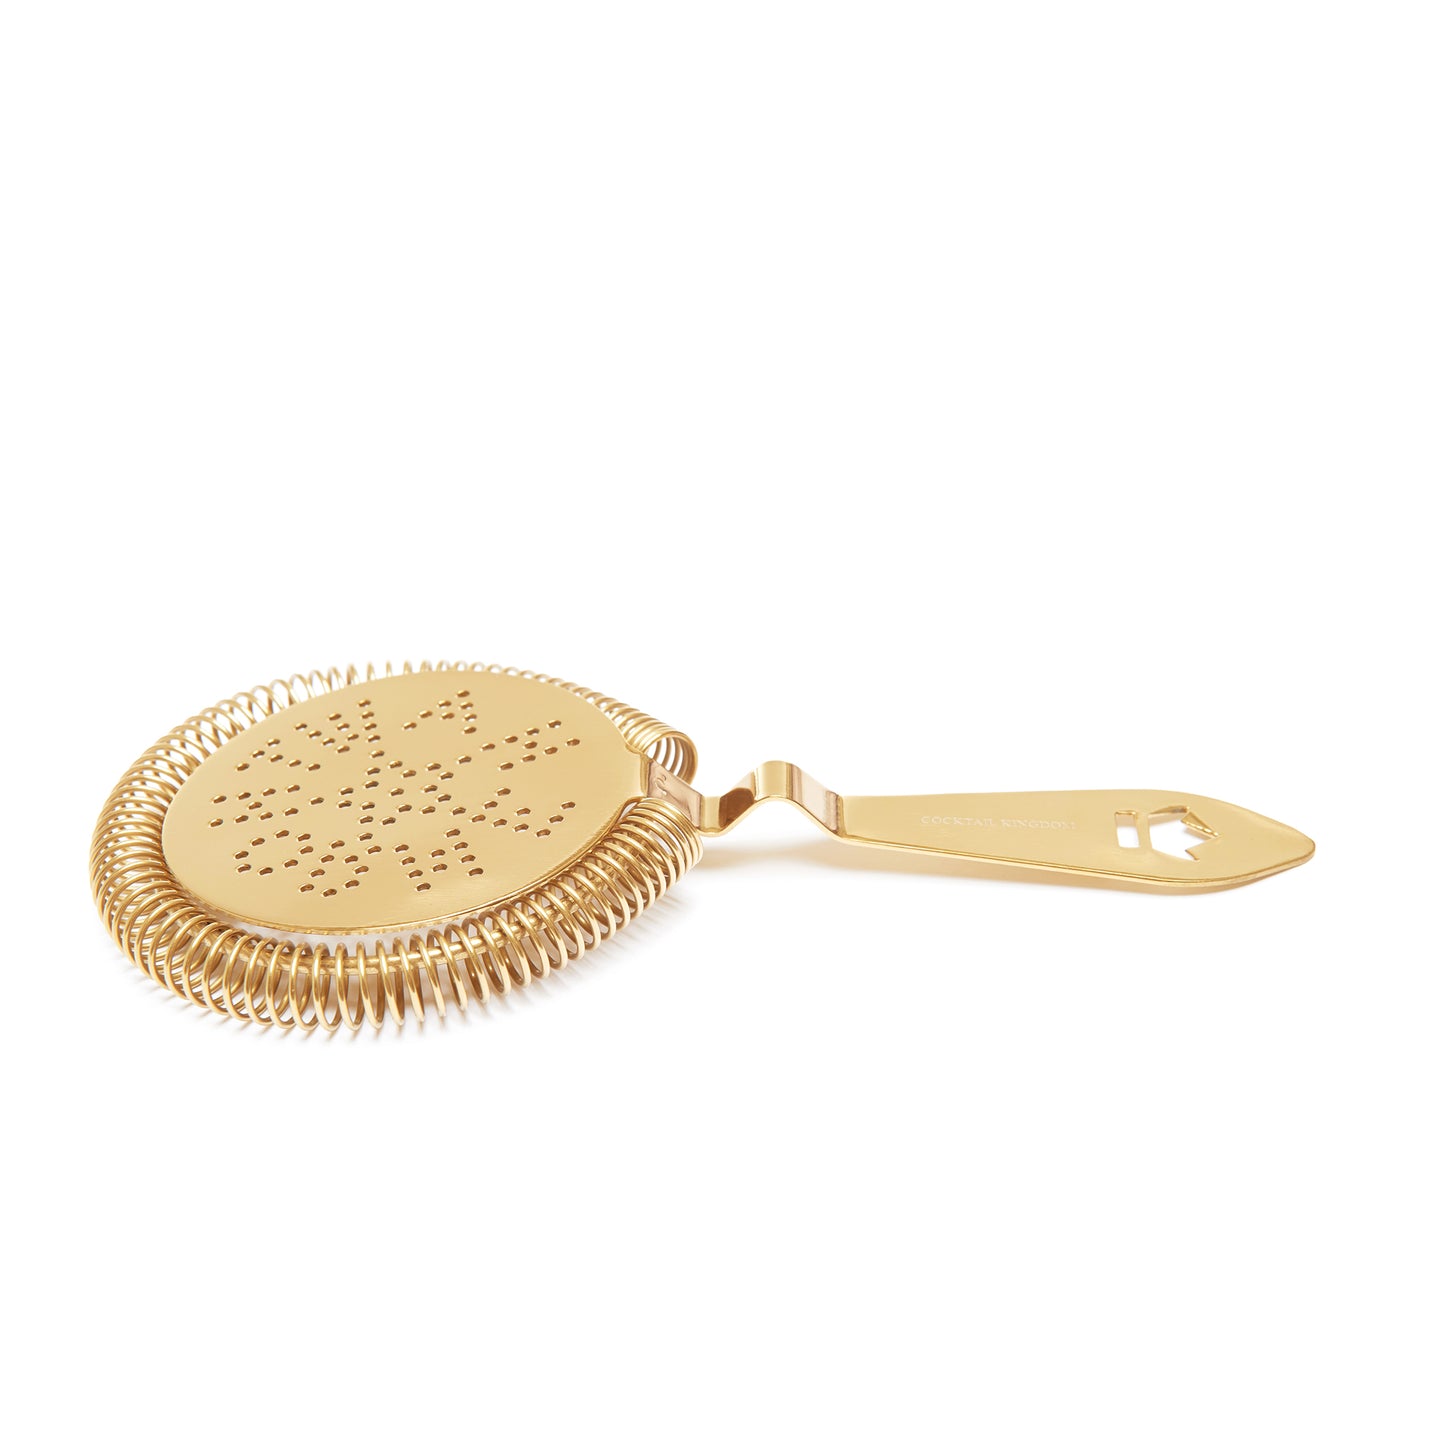 LARGE ANTIQUE-STYLE HAWTHORNE STRAINER / GOLD-PLATED